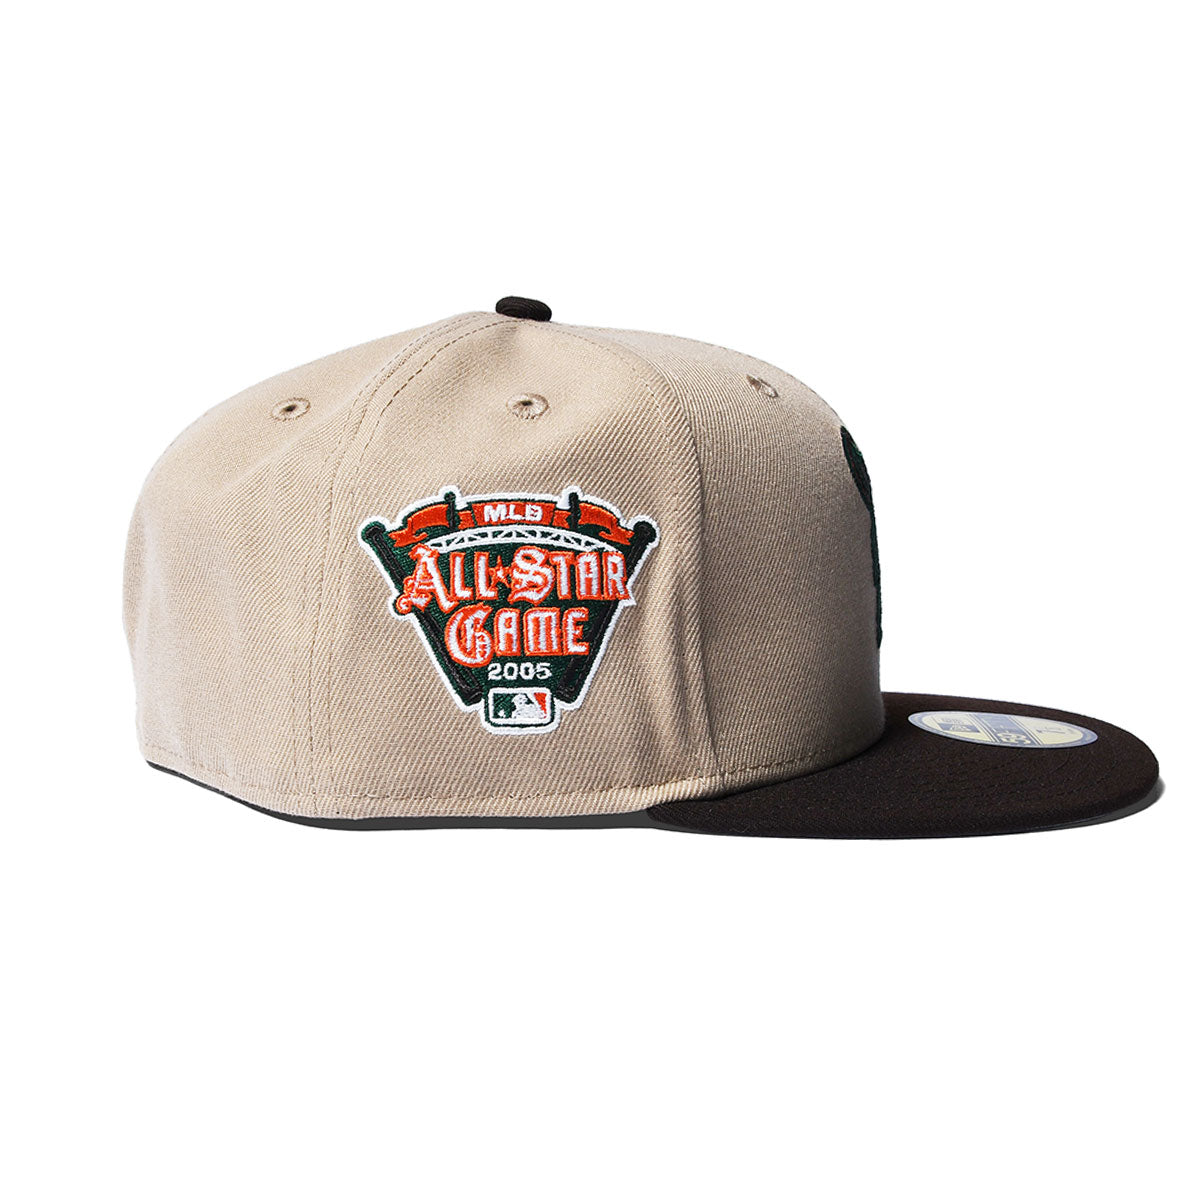 NEWERA-266 Detroit Tigers 2005 ALL-STAR GAME 59FIFTY